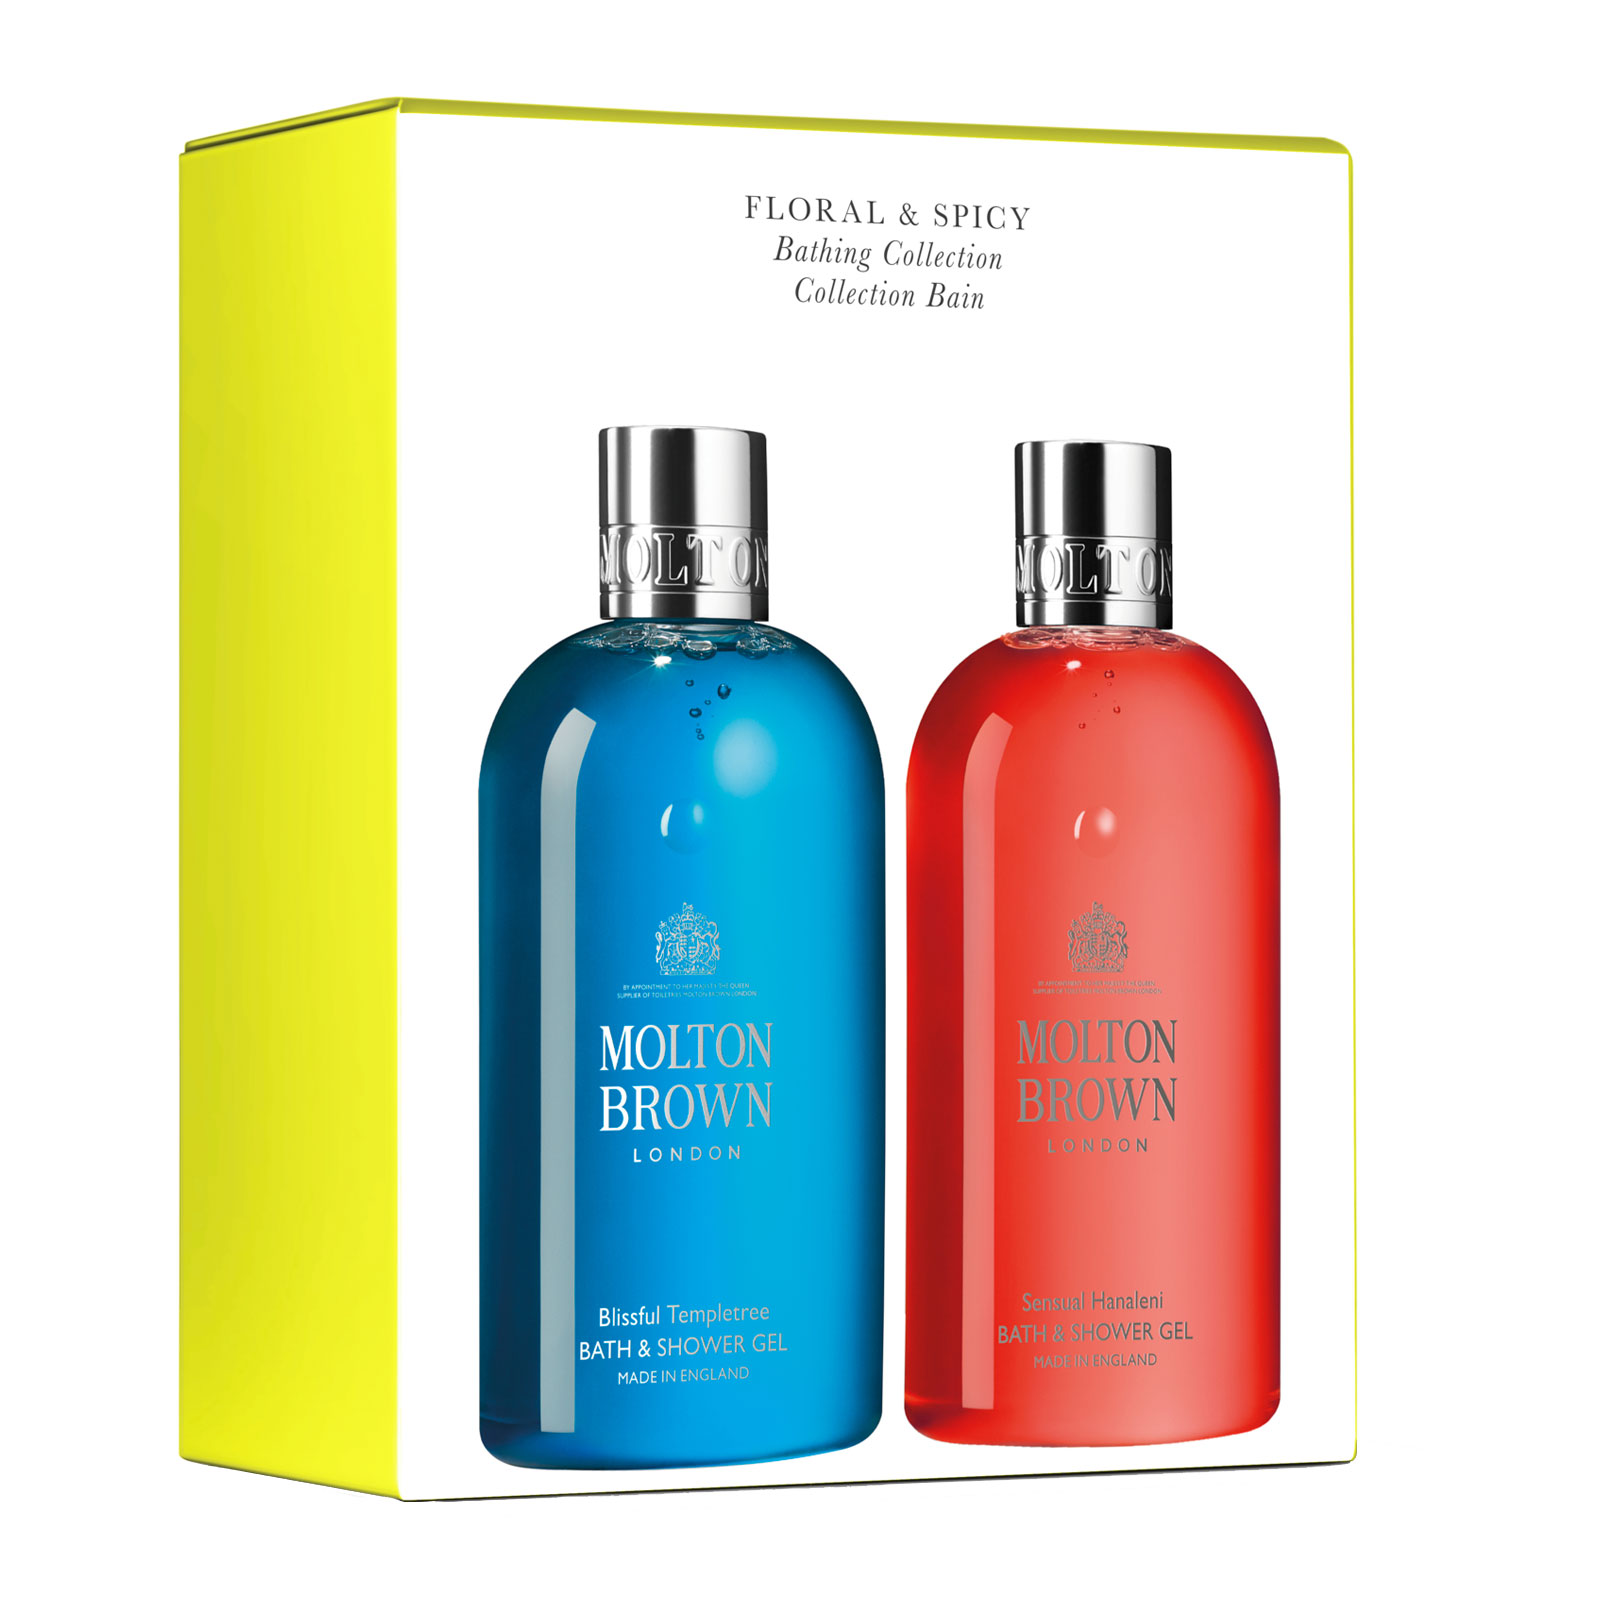 Molton Brown Floral & Spicy Bathing Collection